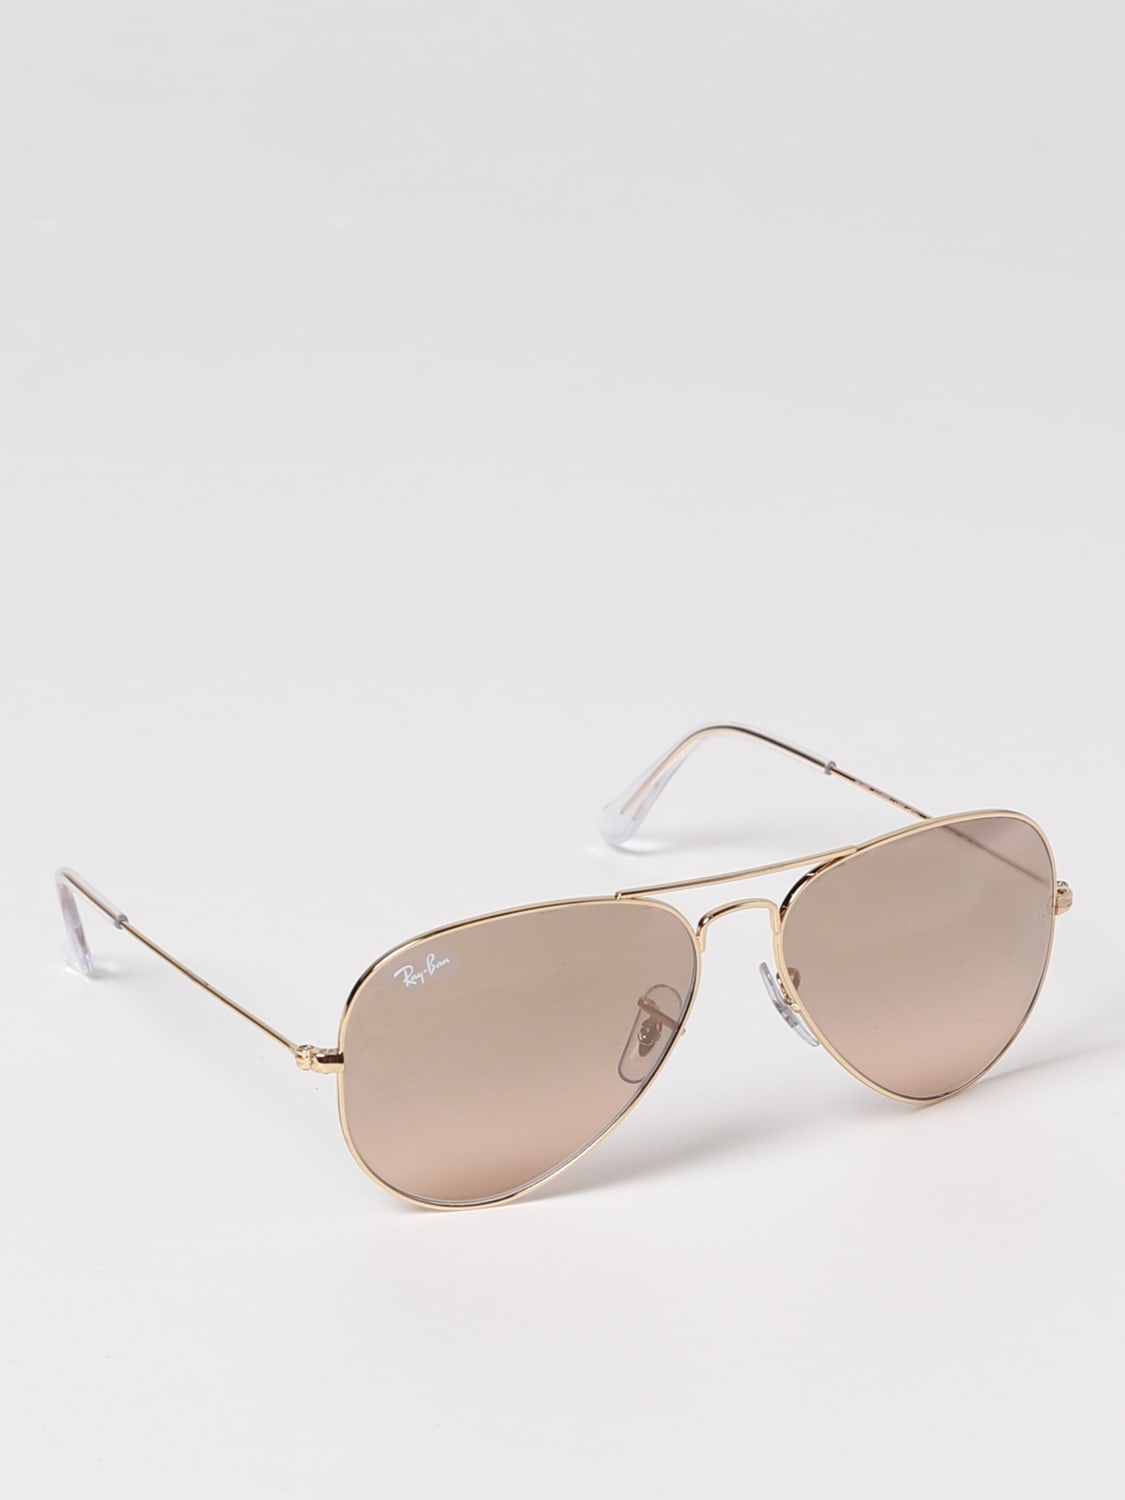 RAY-BAN Outlet: Aviator Sunglasses - Beige | RAY-BAN sunglasses RB 3025  AVIATOR online at GIGLIO.COM